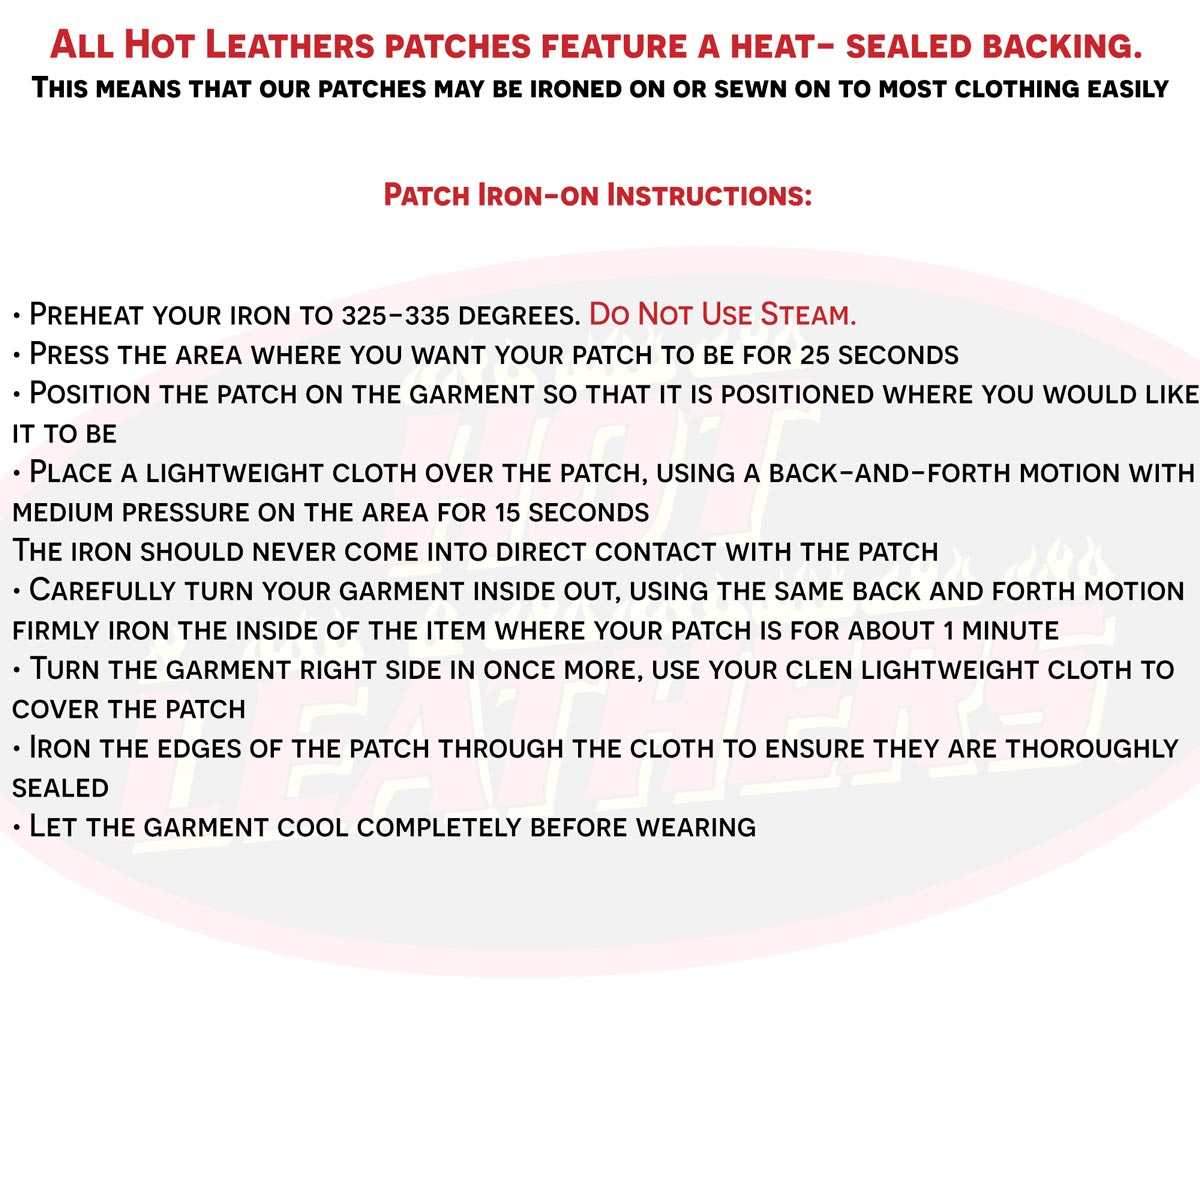 Hot Leathers Loud Pipes Save Lives 4” X 1” Bottom Rocker Patch PPM5200